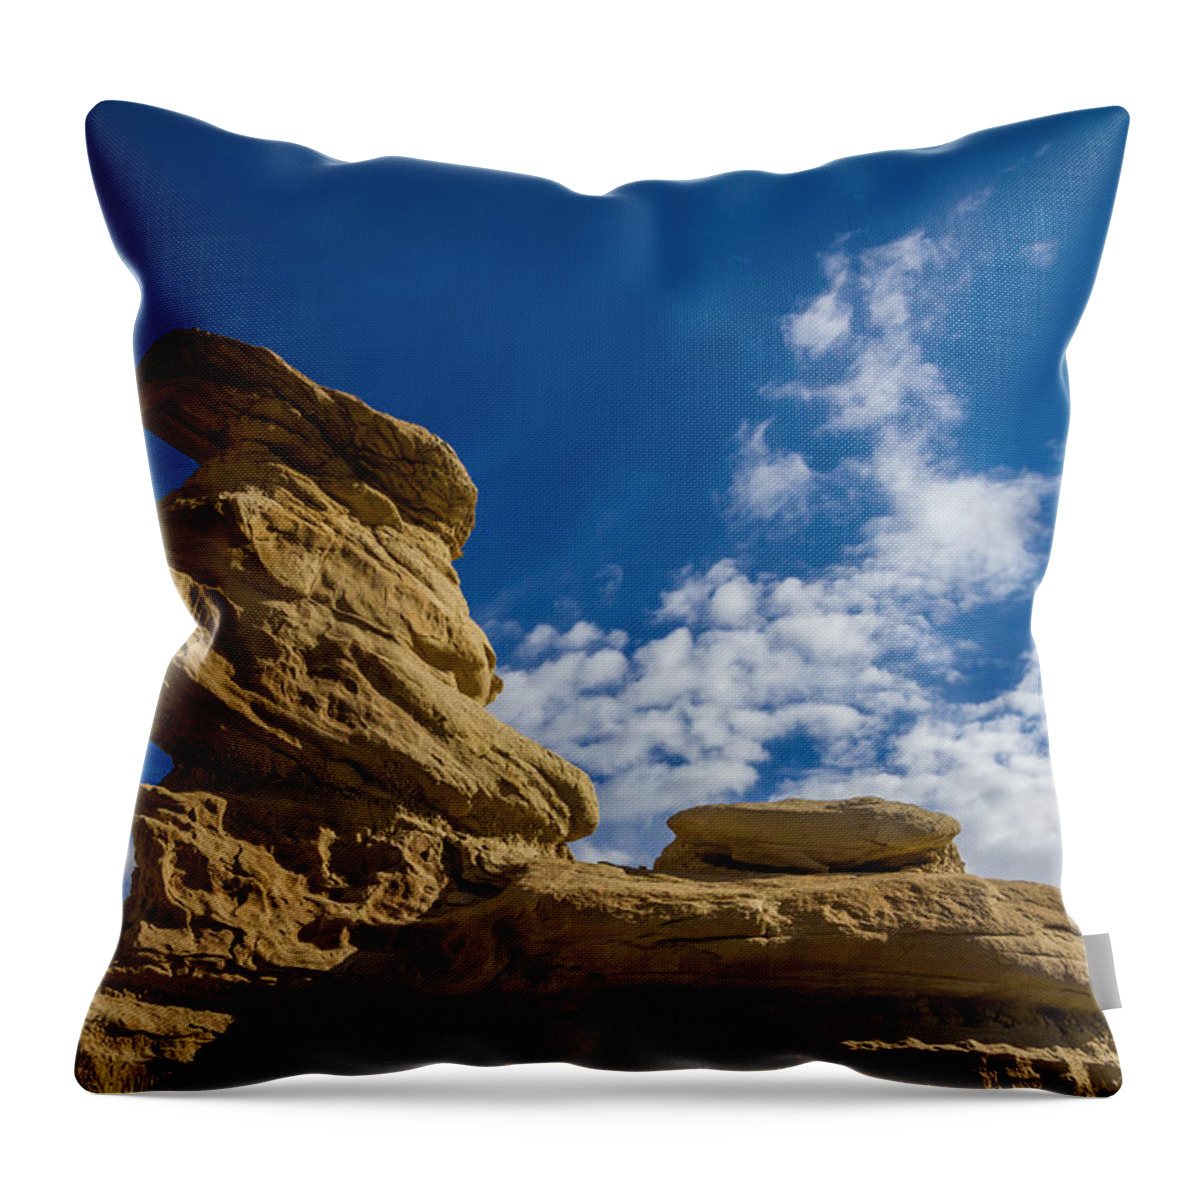 Badlands Throw Pillow featuring the photograph Hoodoo Rock Formations by Ron Pate